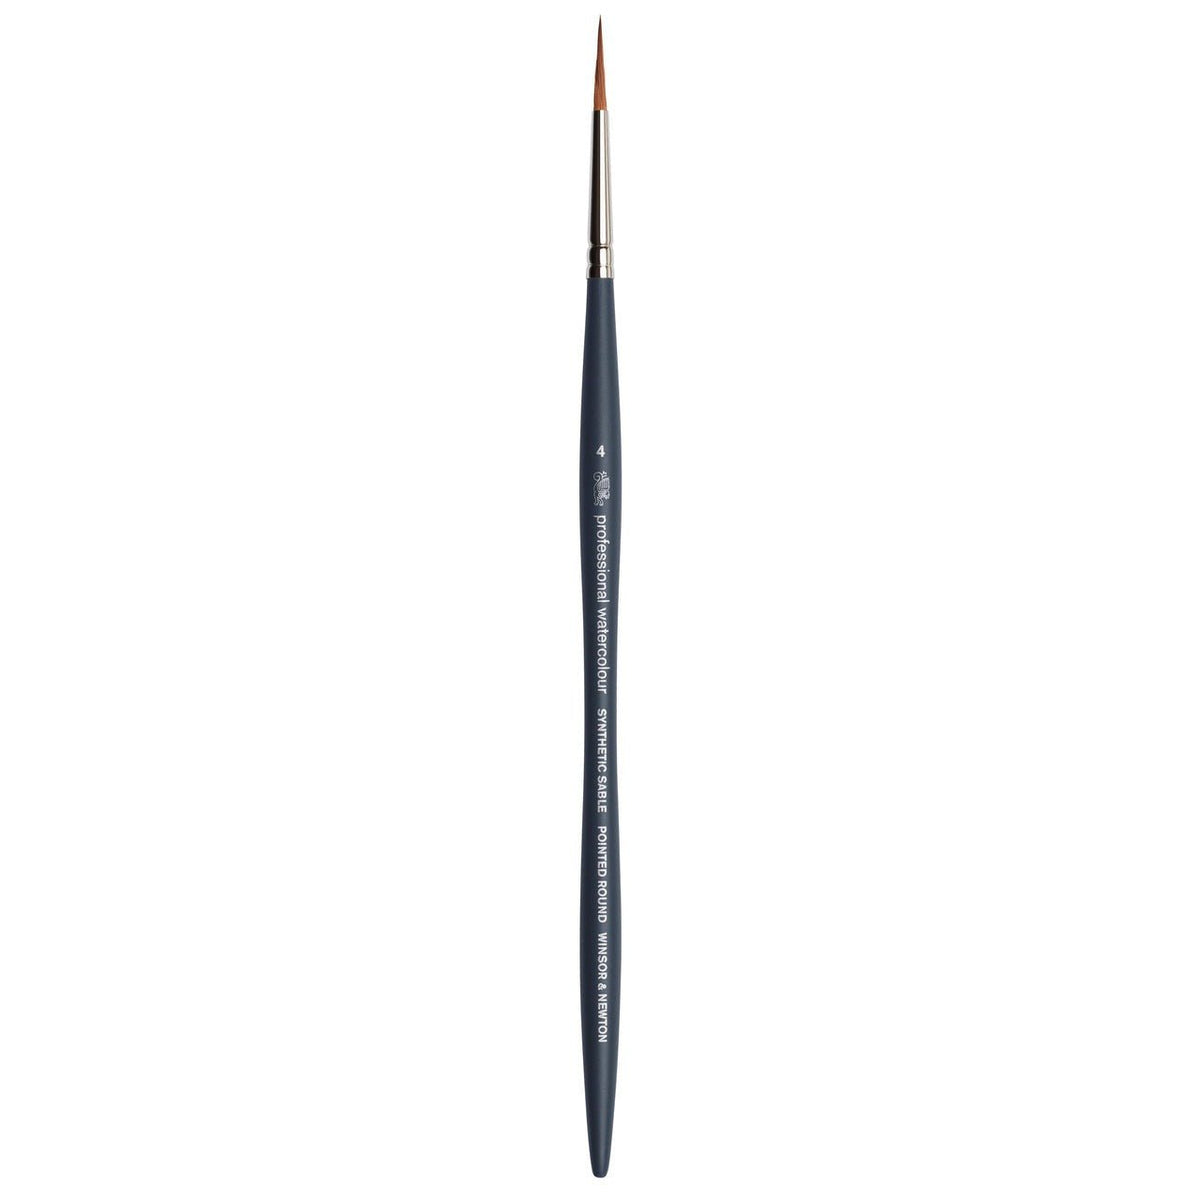 Winsor & Newton Professional Watercolor Synthetic Sable Brush - Pointed Round 4 - merriartist.com